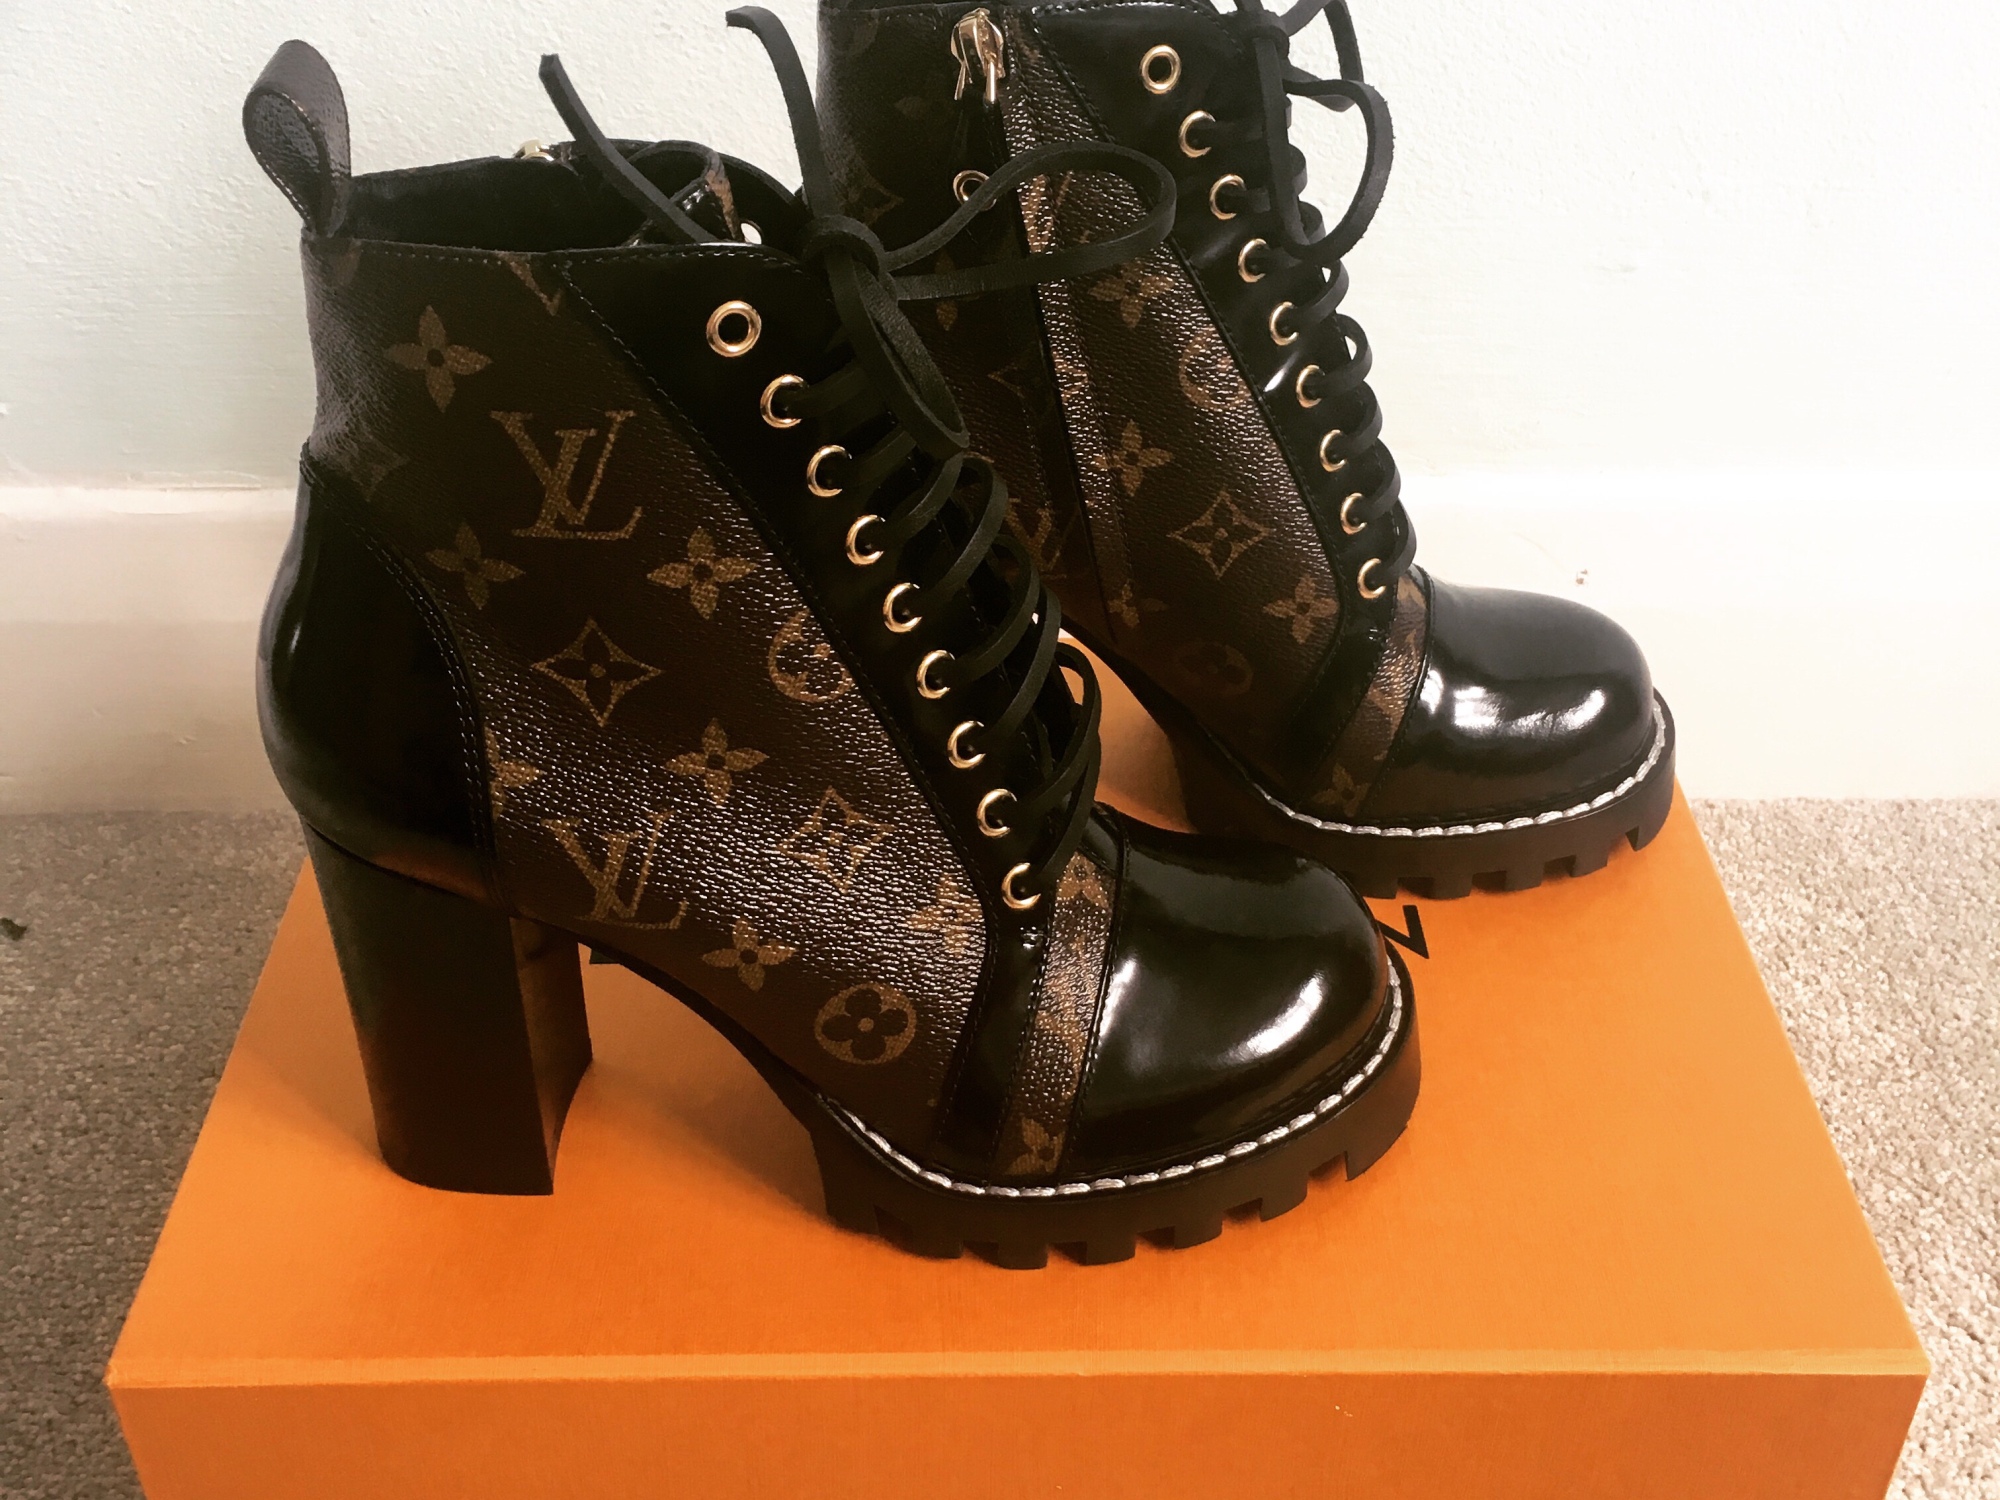 Louis Vuitton boots… are they worth the splurge? – Makeup & Fashion Blog